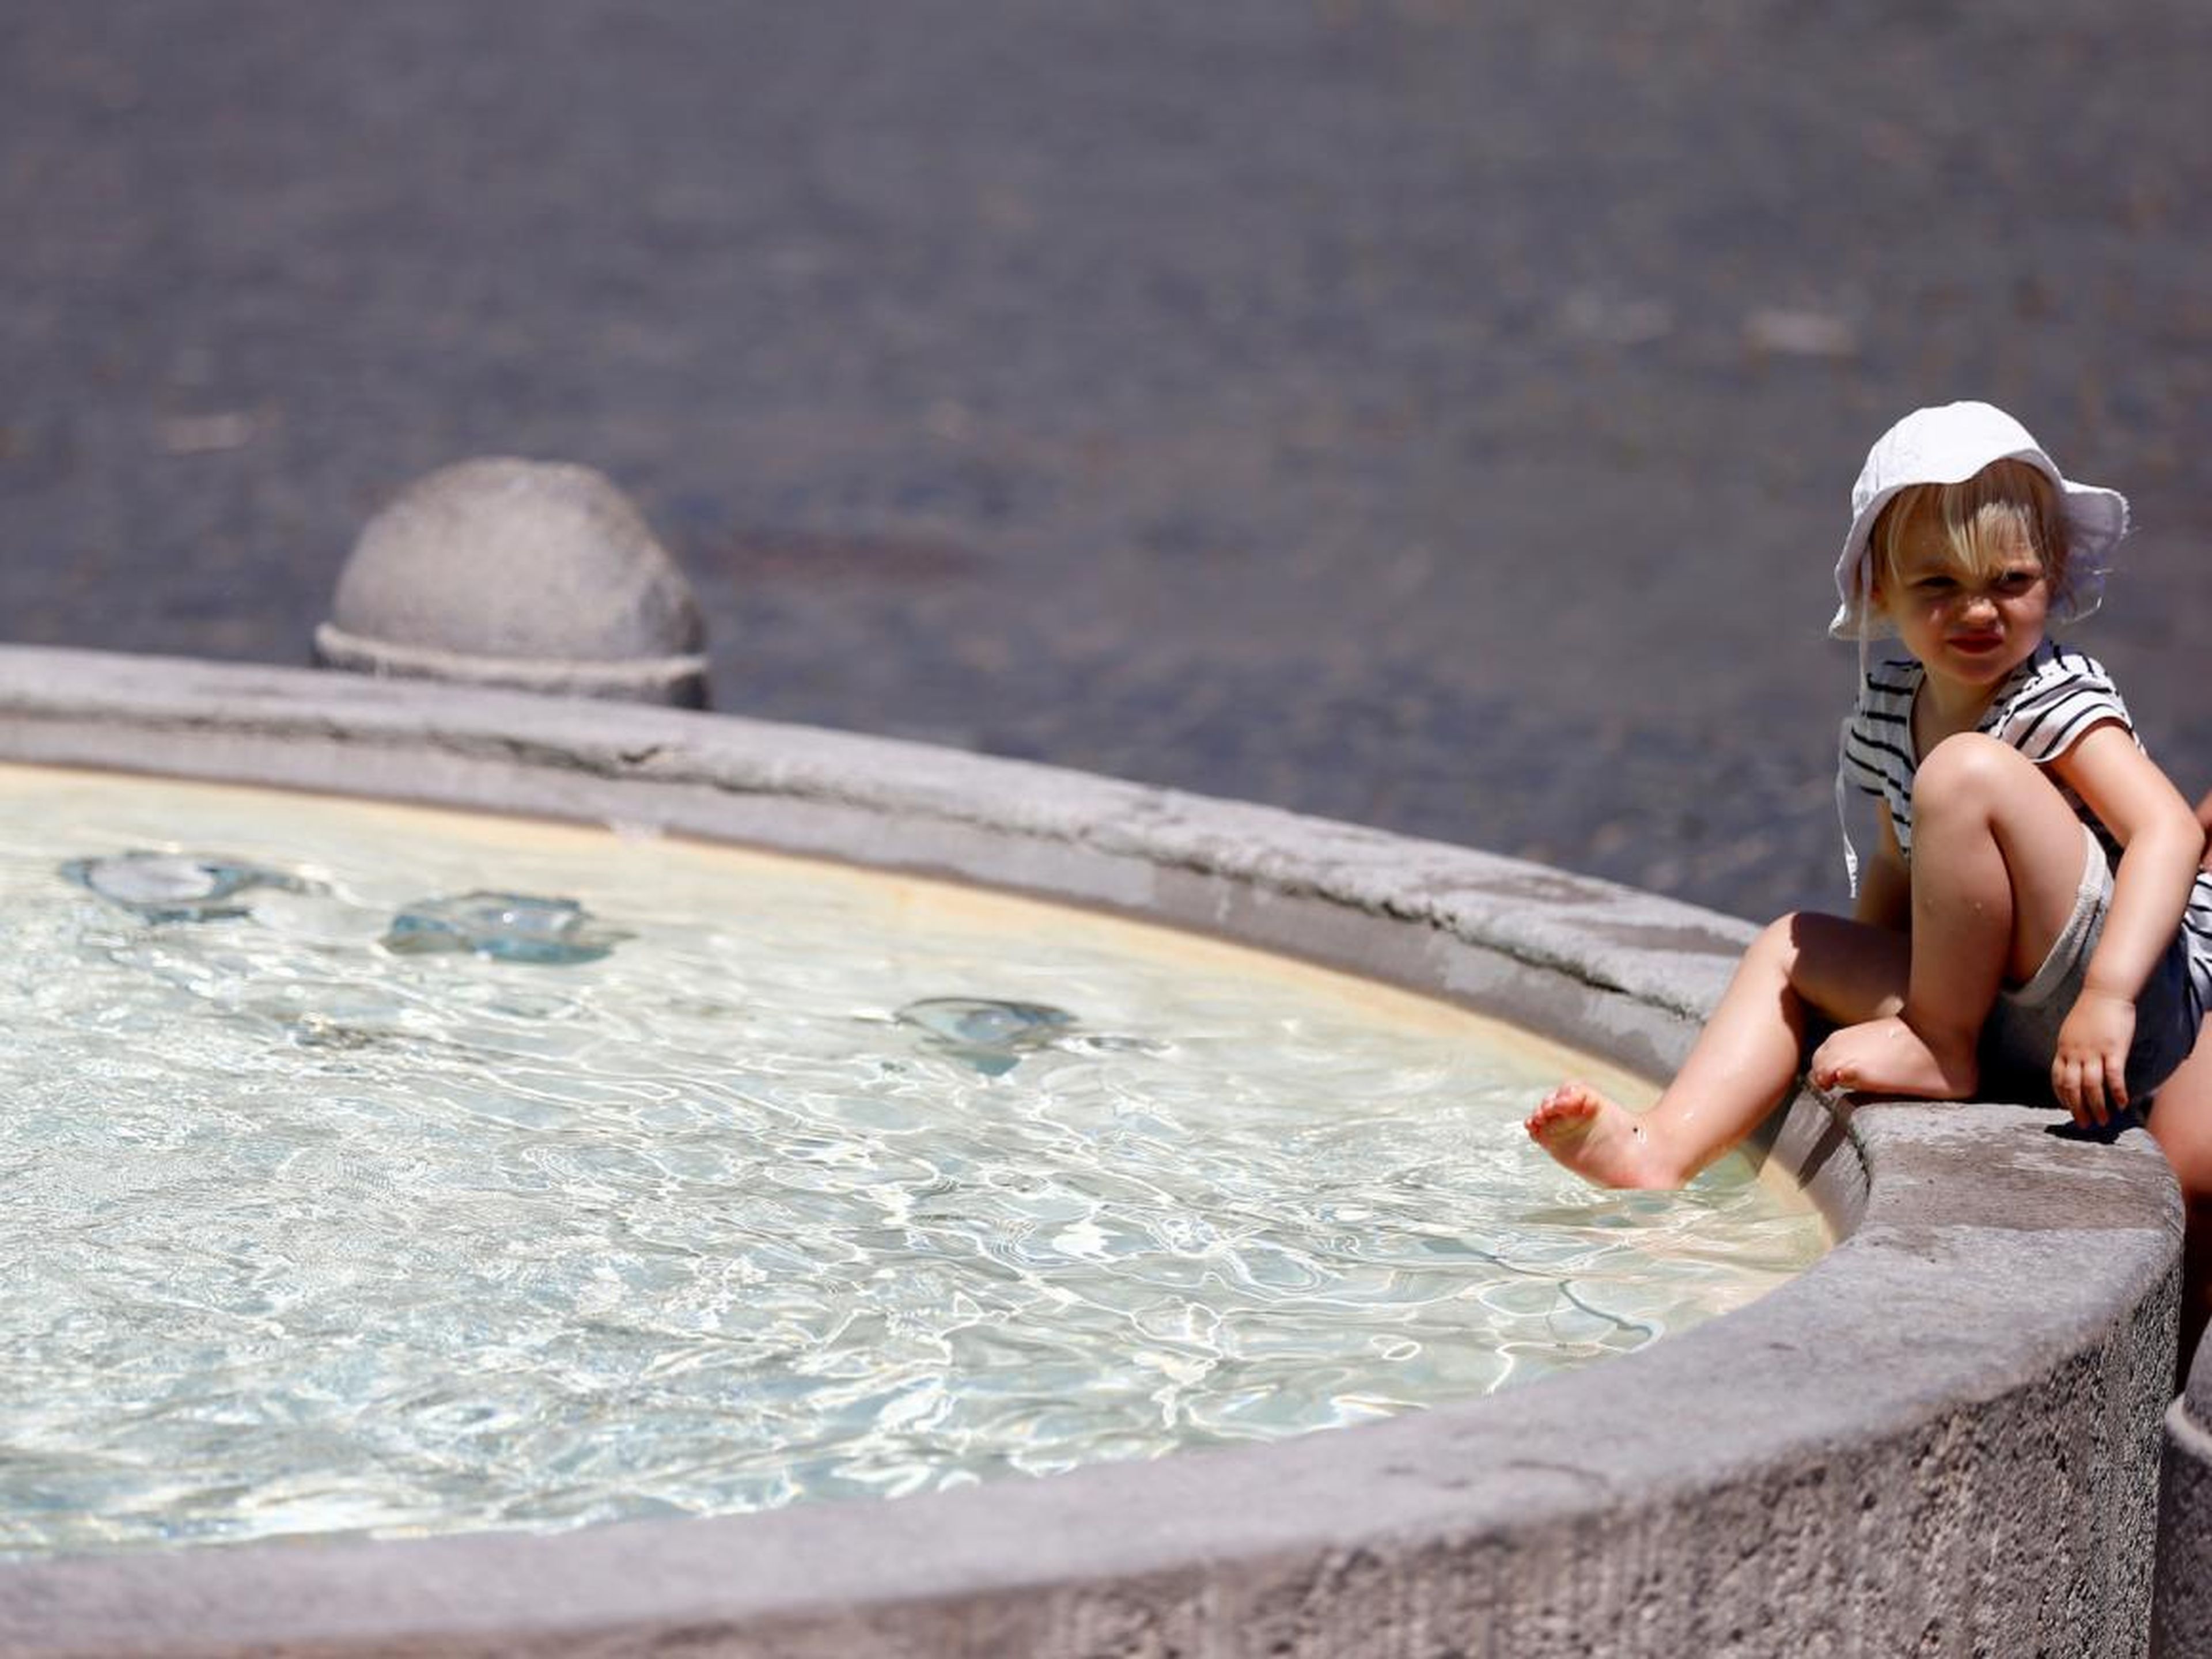 Cooling off in Rome.